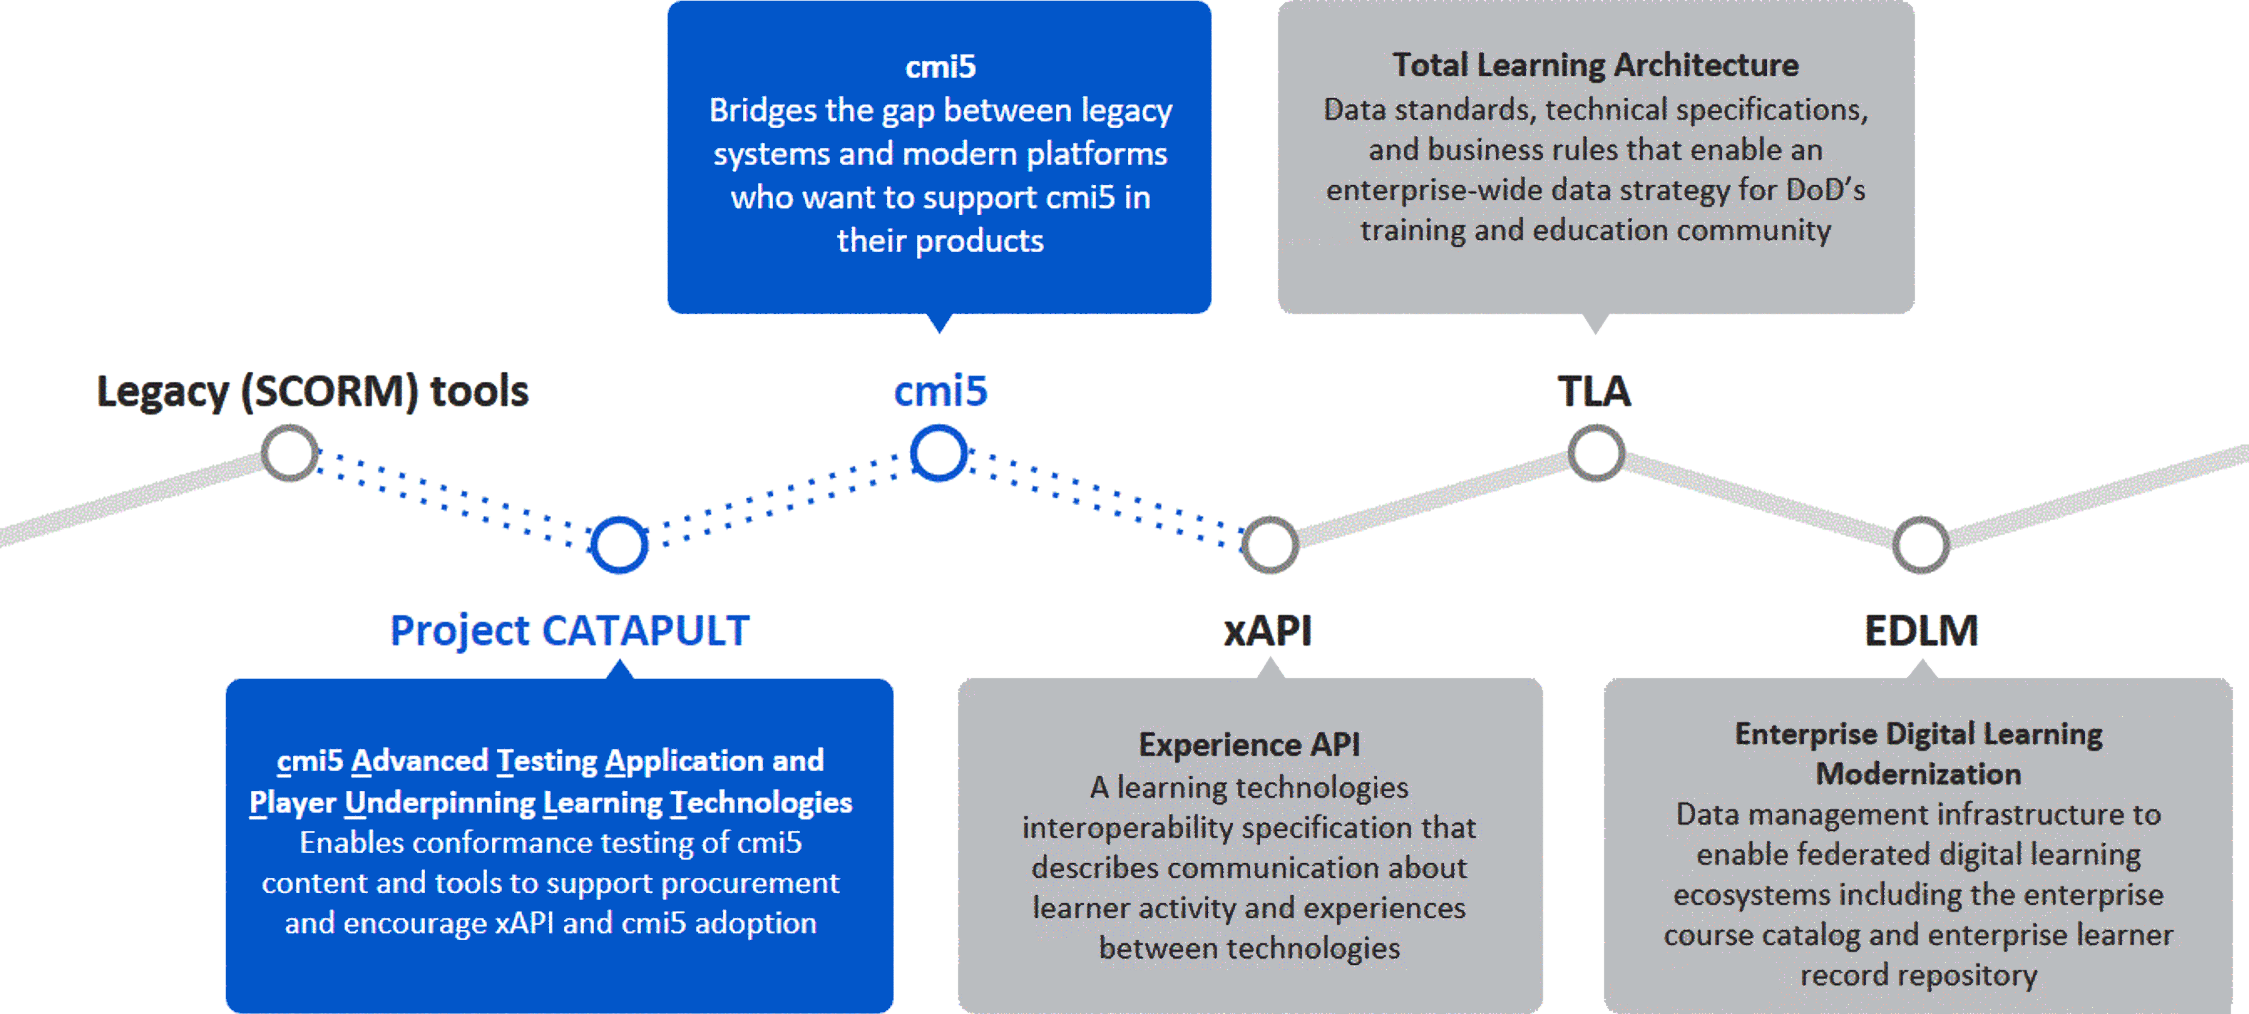 A timeline of where Project CATAPULT and cmi5 fit in, between Legacy SCORM tools and xAPI